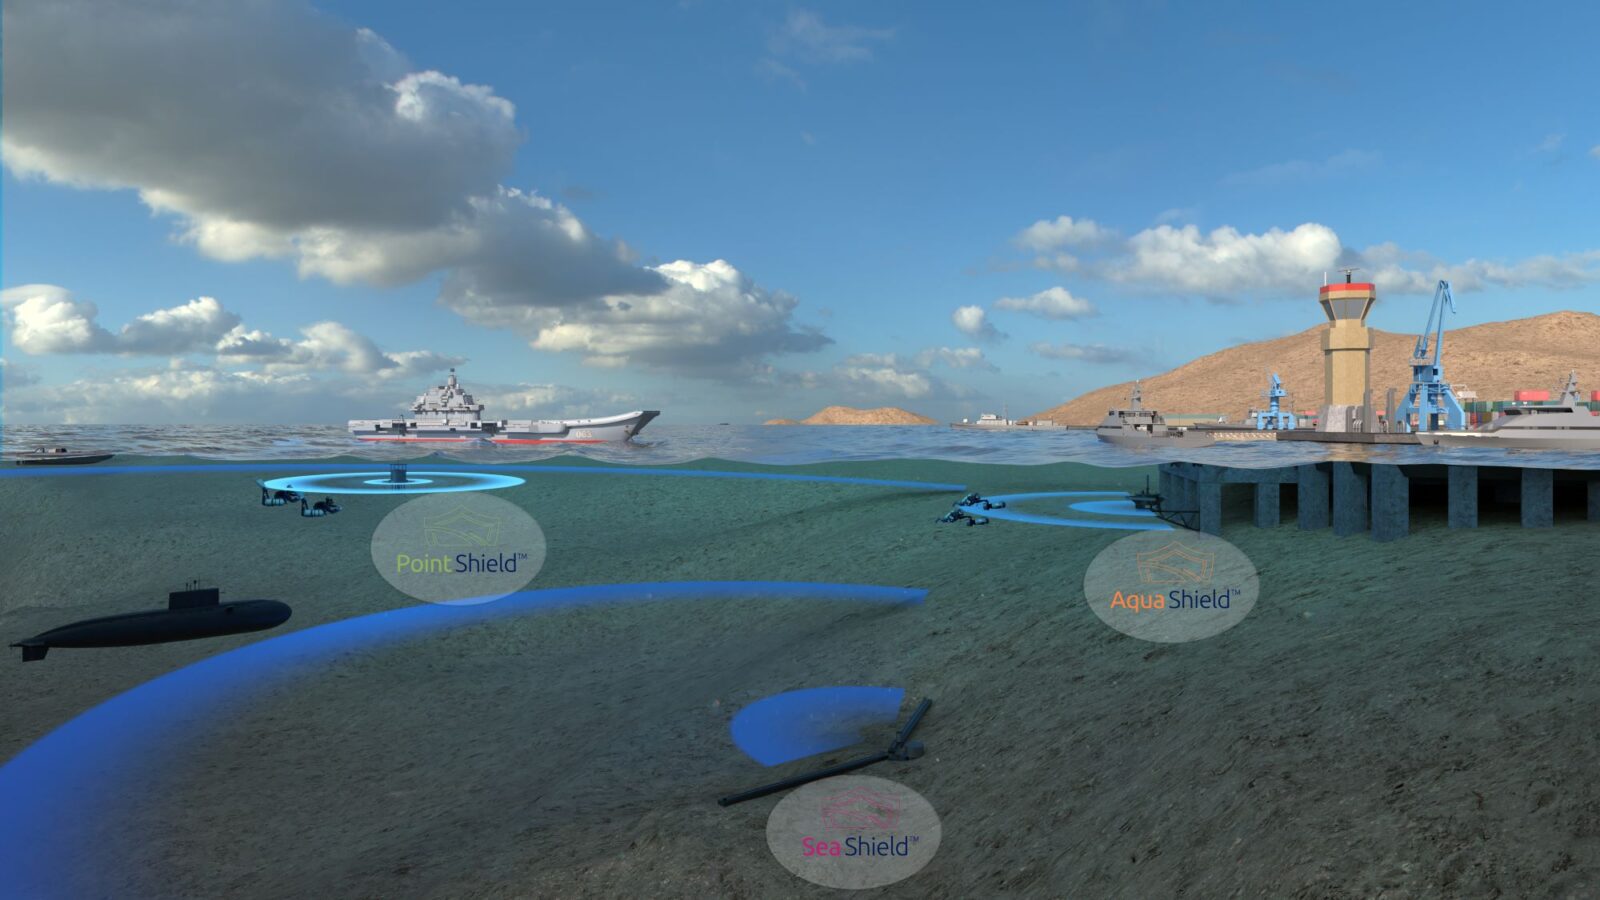 DSIT Solutions Ltd. Showcases its Unique Multilayered Comprehensive Sonar-Based Solution for the Defense of Underwater Strategic Assets against Immediate, Short- and Long-Range Threats